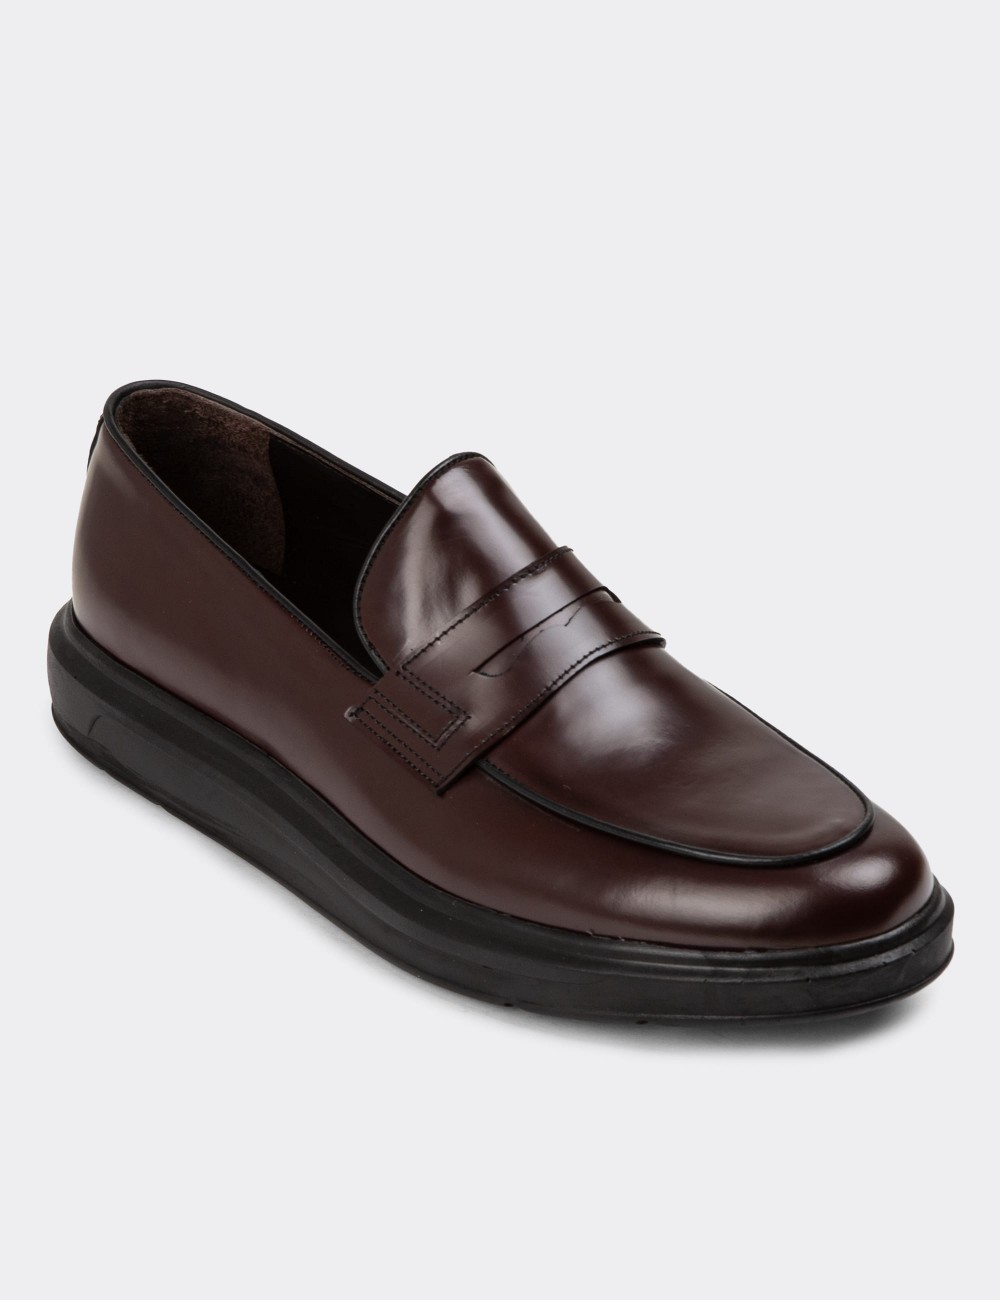 Burgundy Leather Loafers - 01839MBRDP02